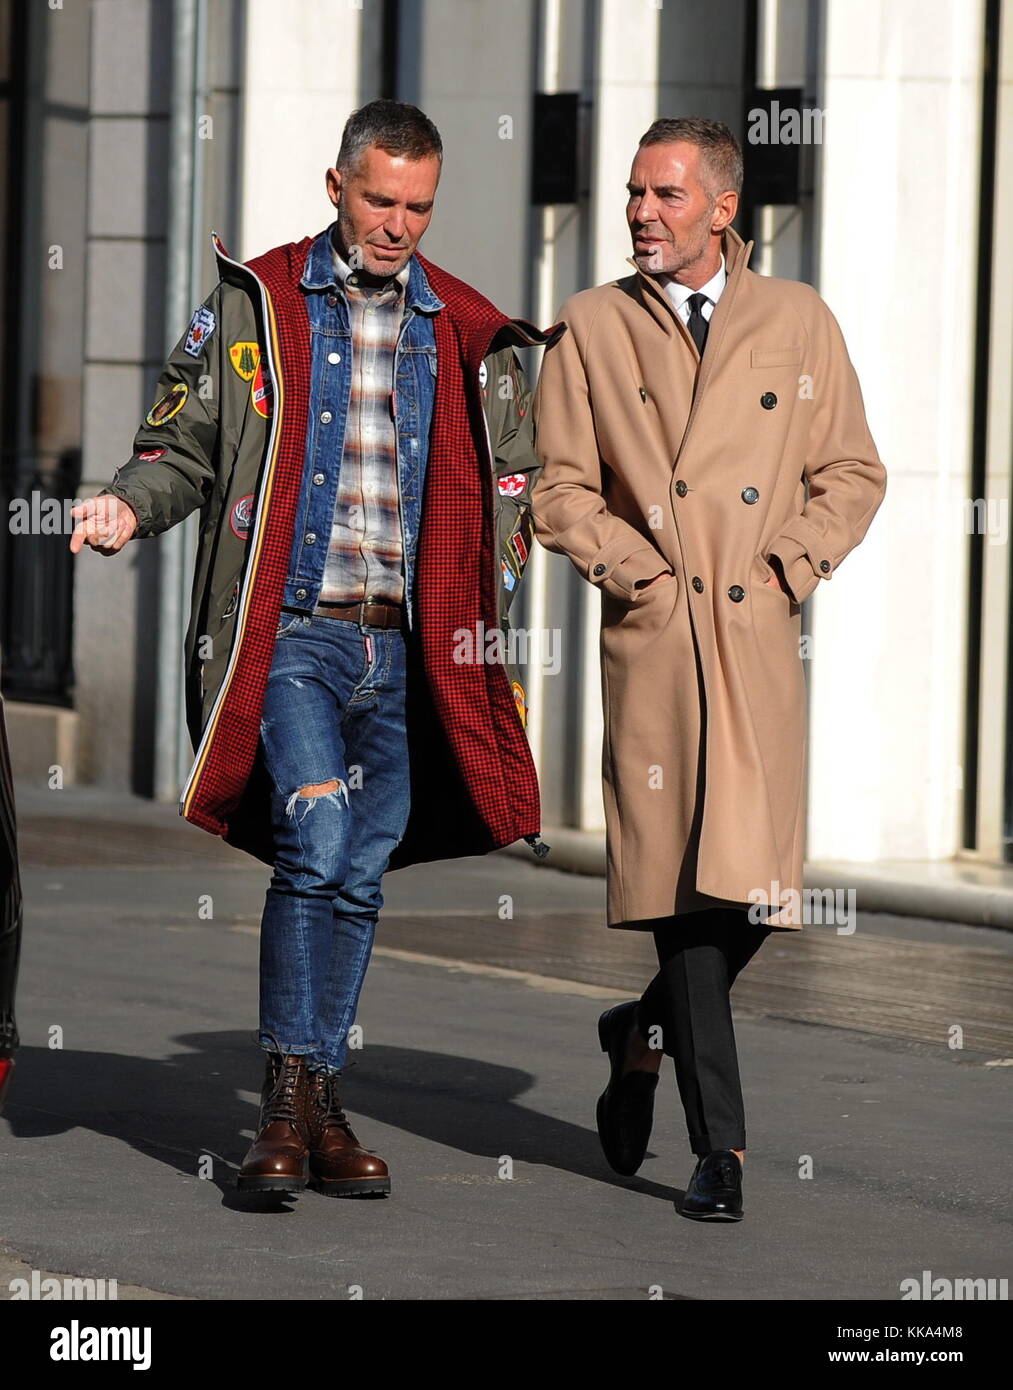 DSQUARED 2 fashion designers, Dean and Dan Caten spotted walking